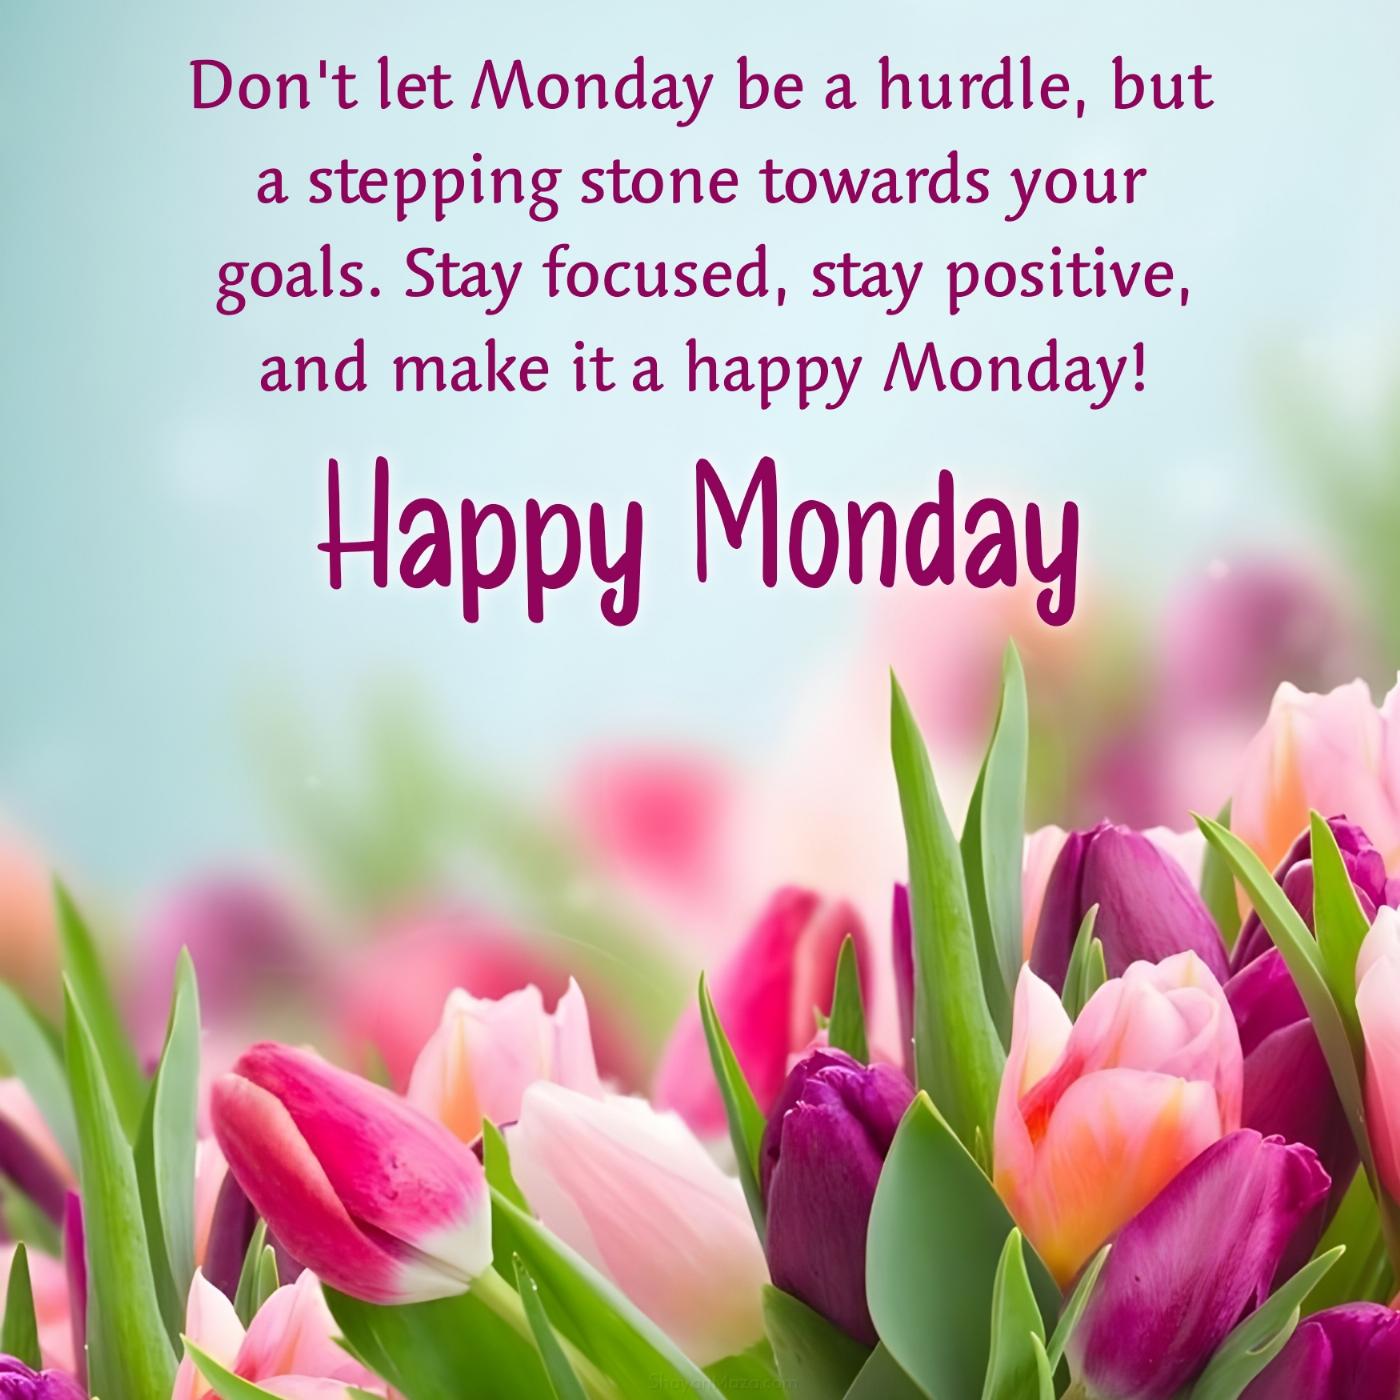 Don't let Monday be a hurdle but a stepping stone towards your goals